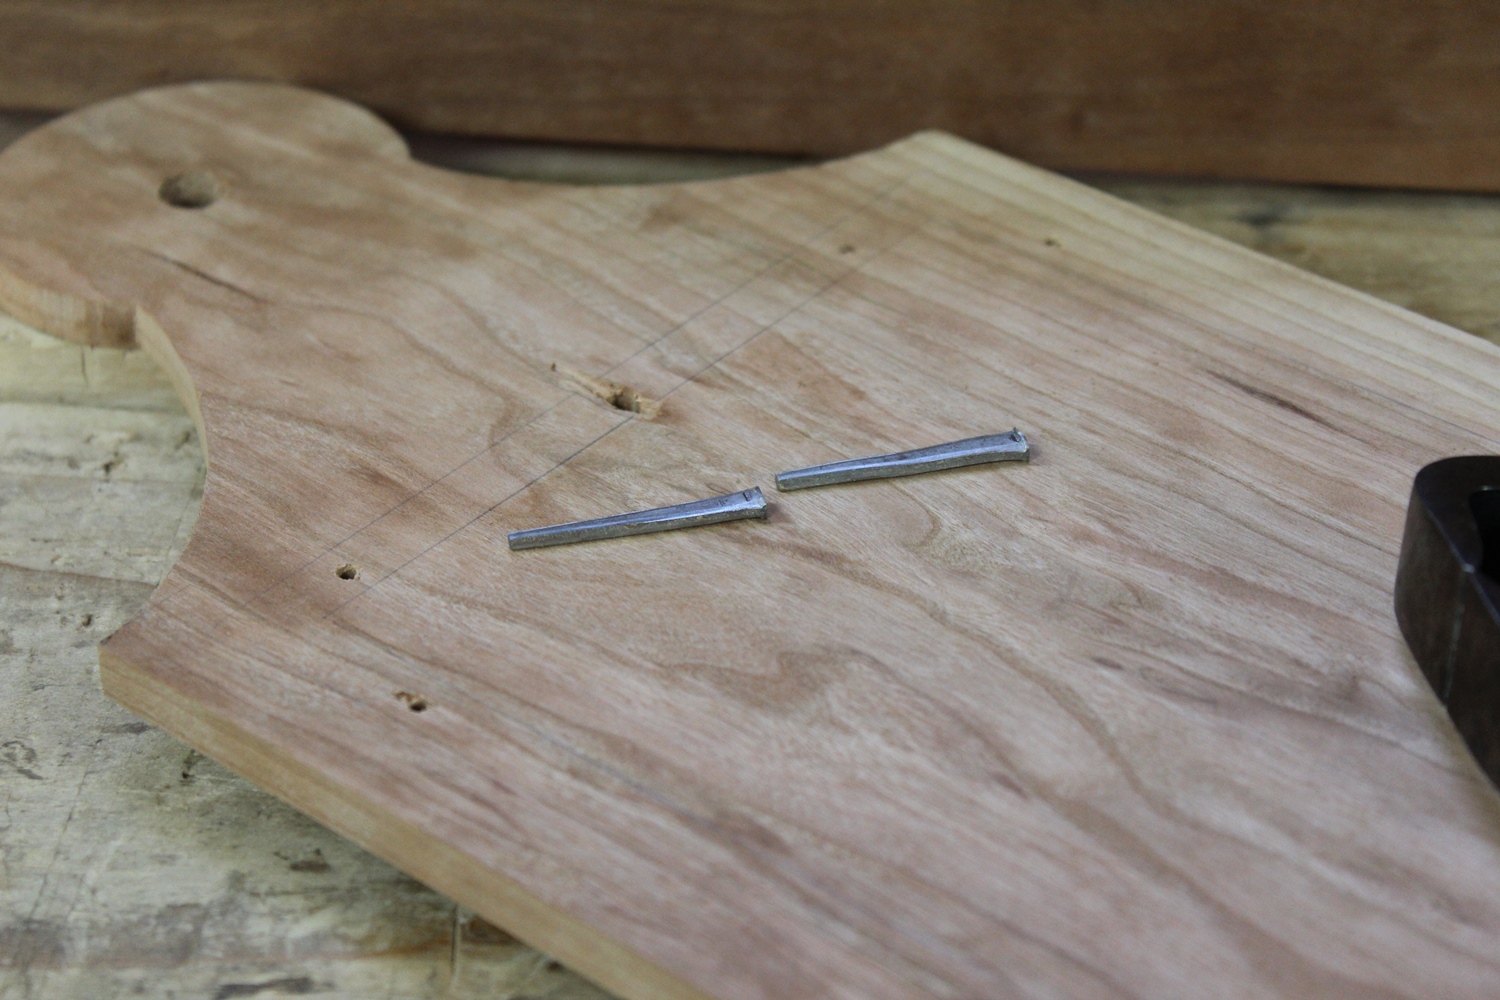 Small cut finish nails hold stronger than you think